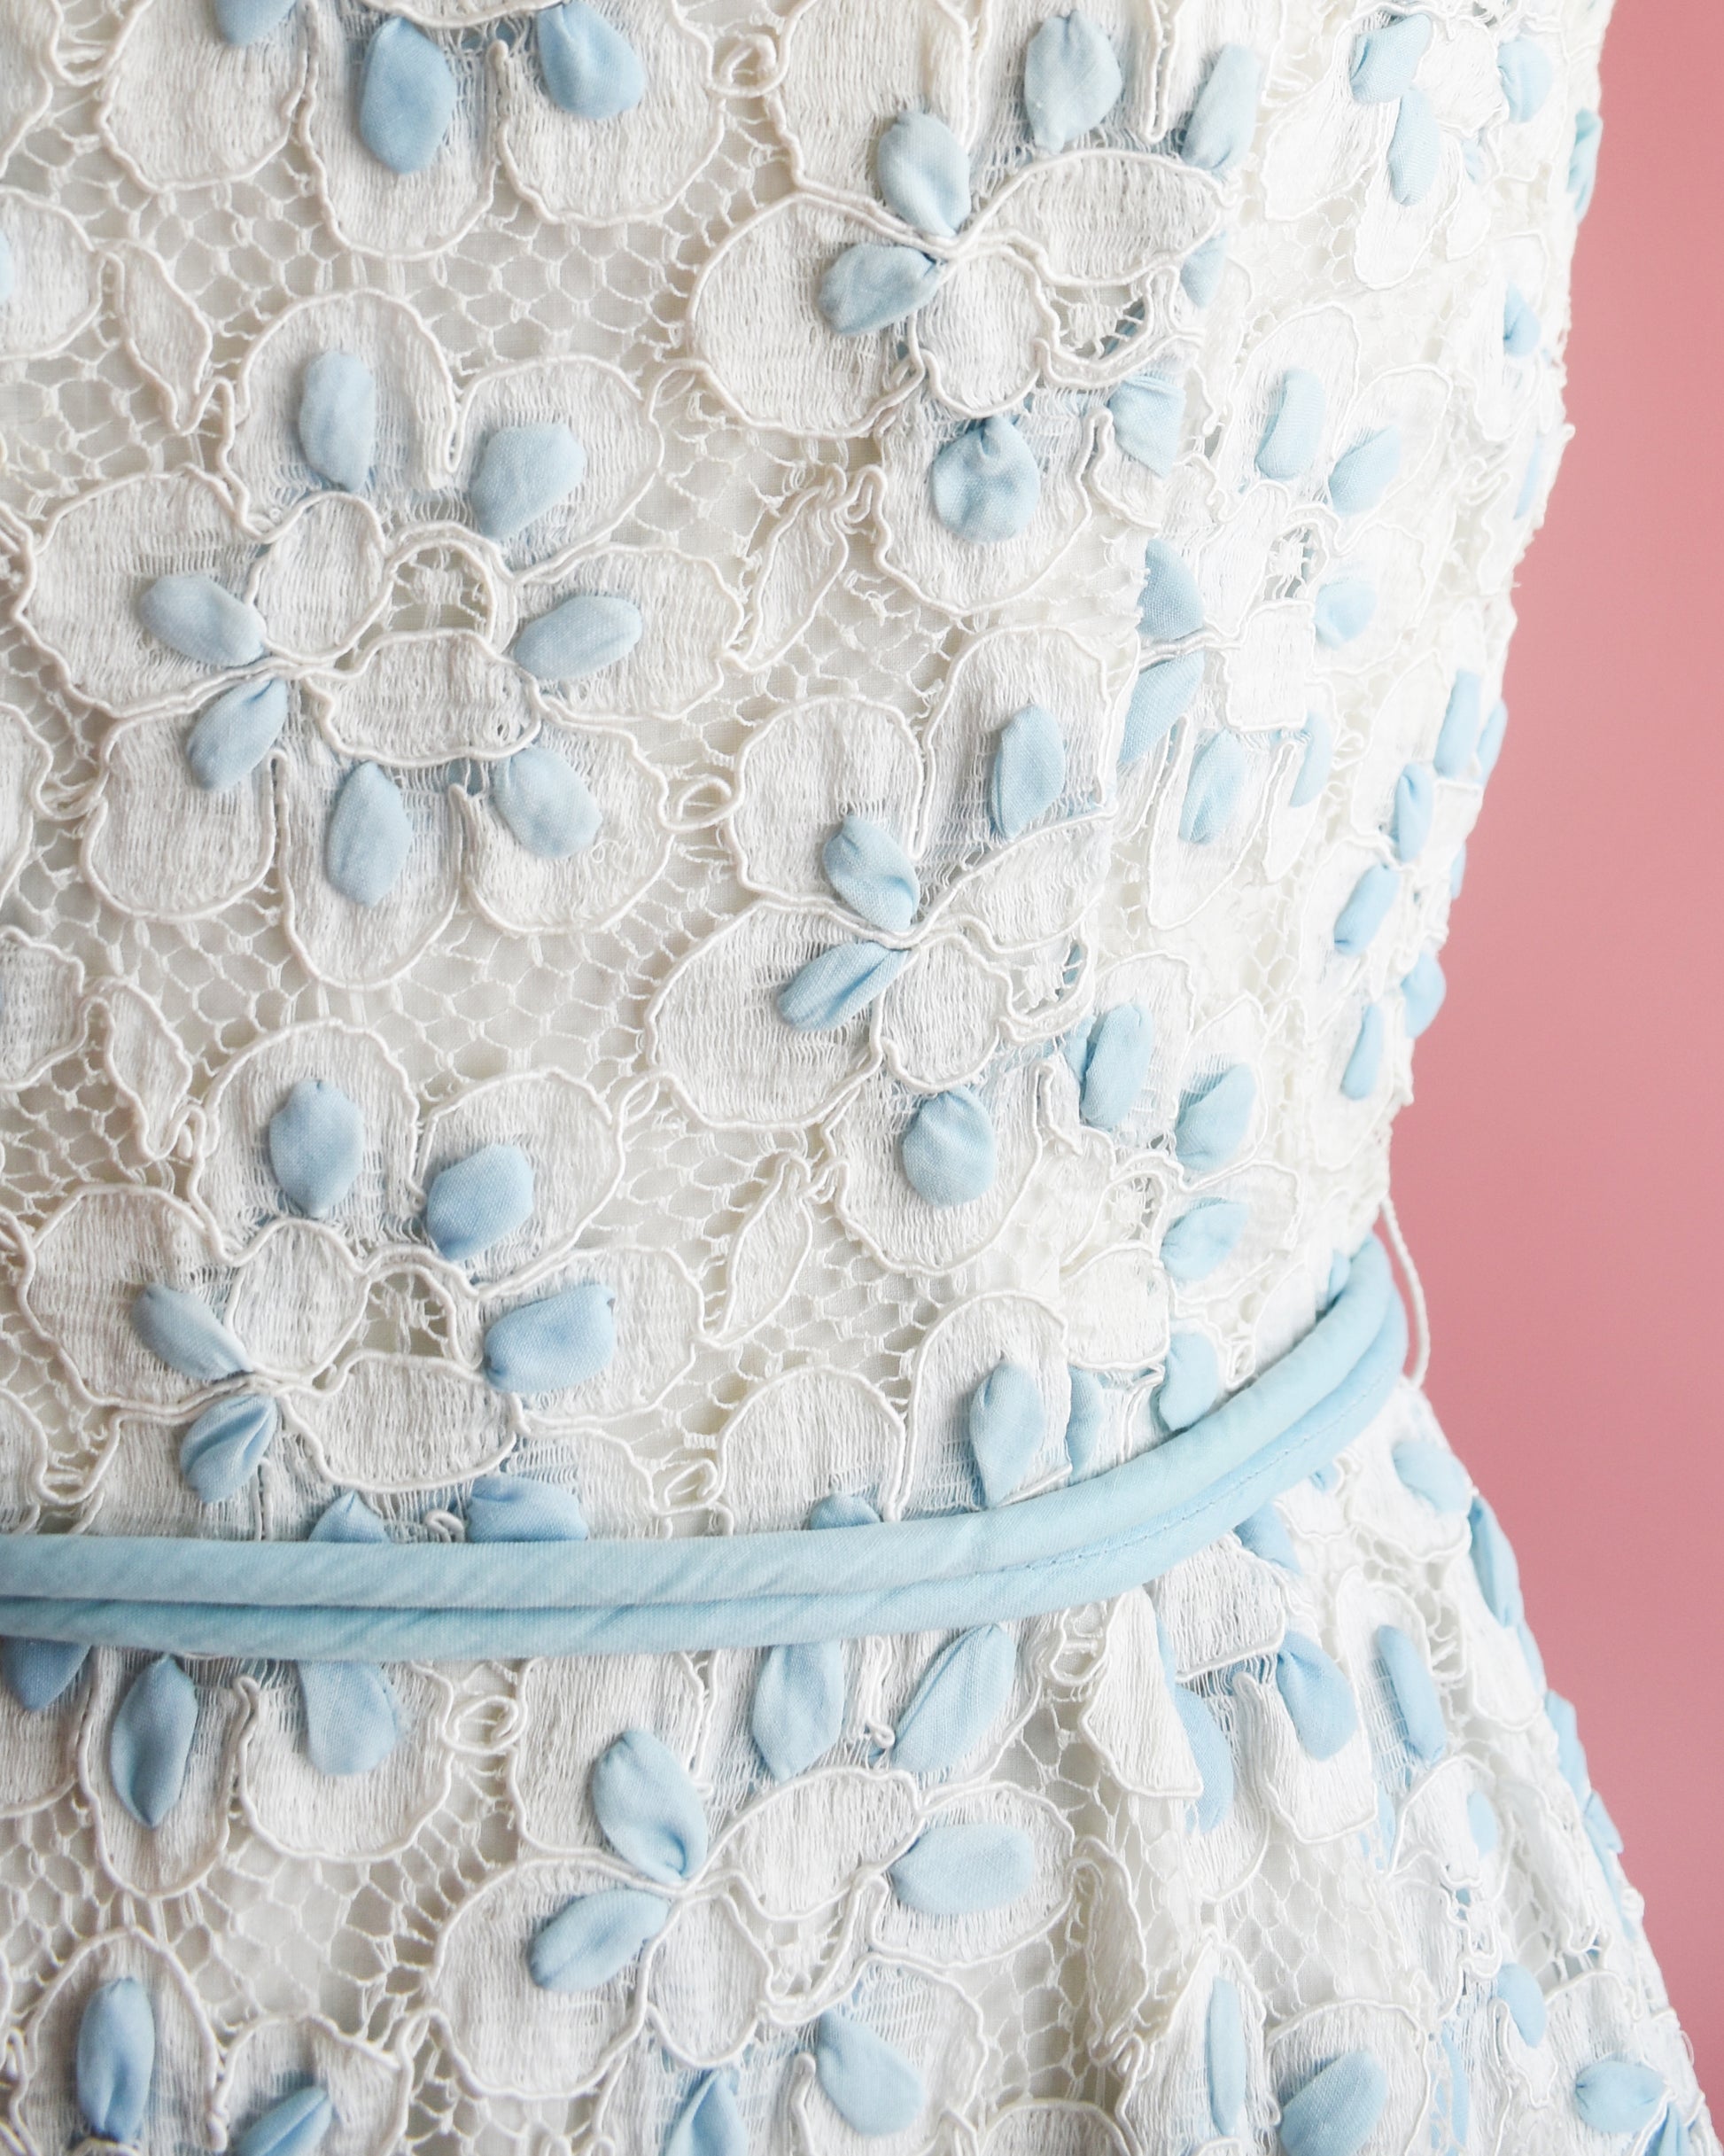 Close up of the waist, floral detail, and rope belt.